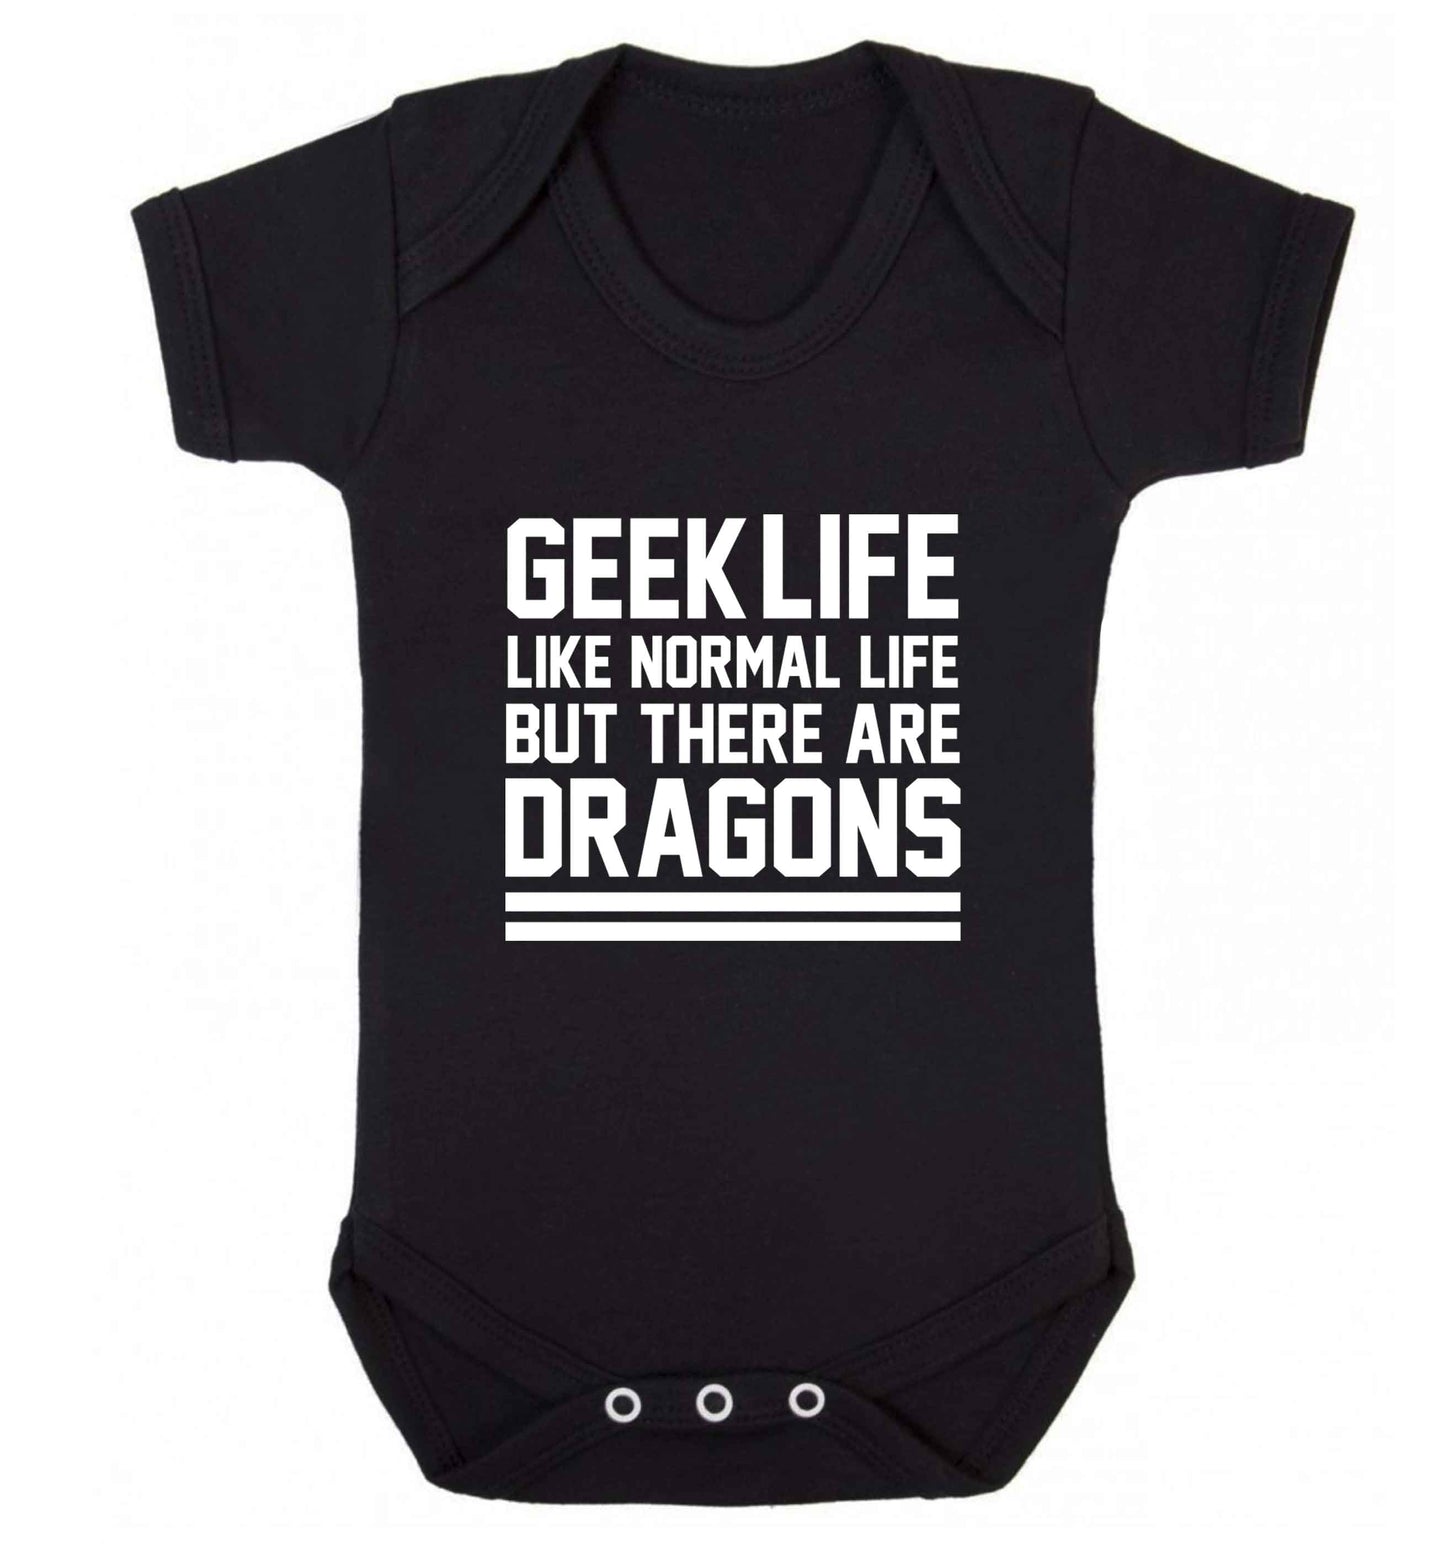 Geek life like normal life but there are dragons baby vest black 18-24 months